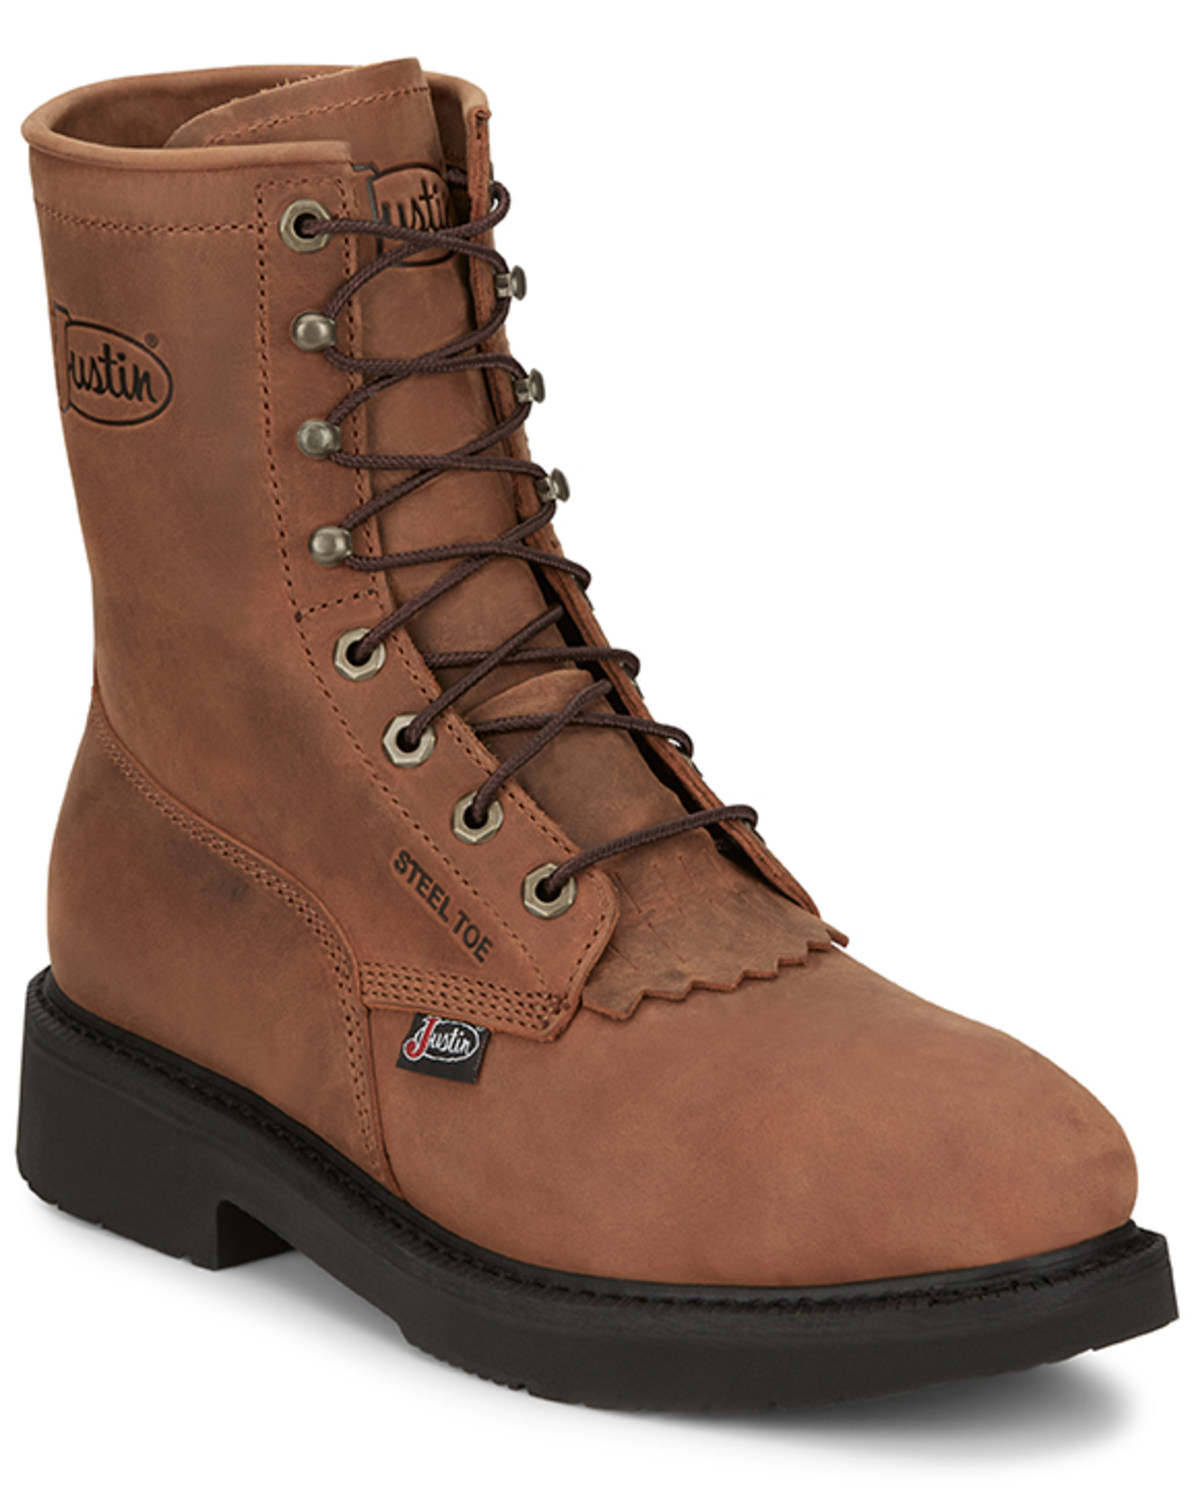 Justin Men's 8" Conductor Lace-Up Work Boots - Steel Toe